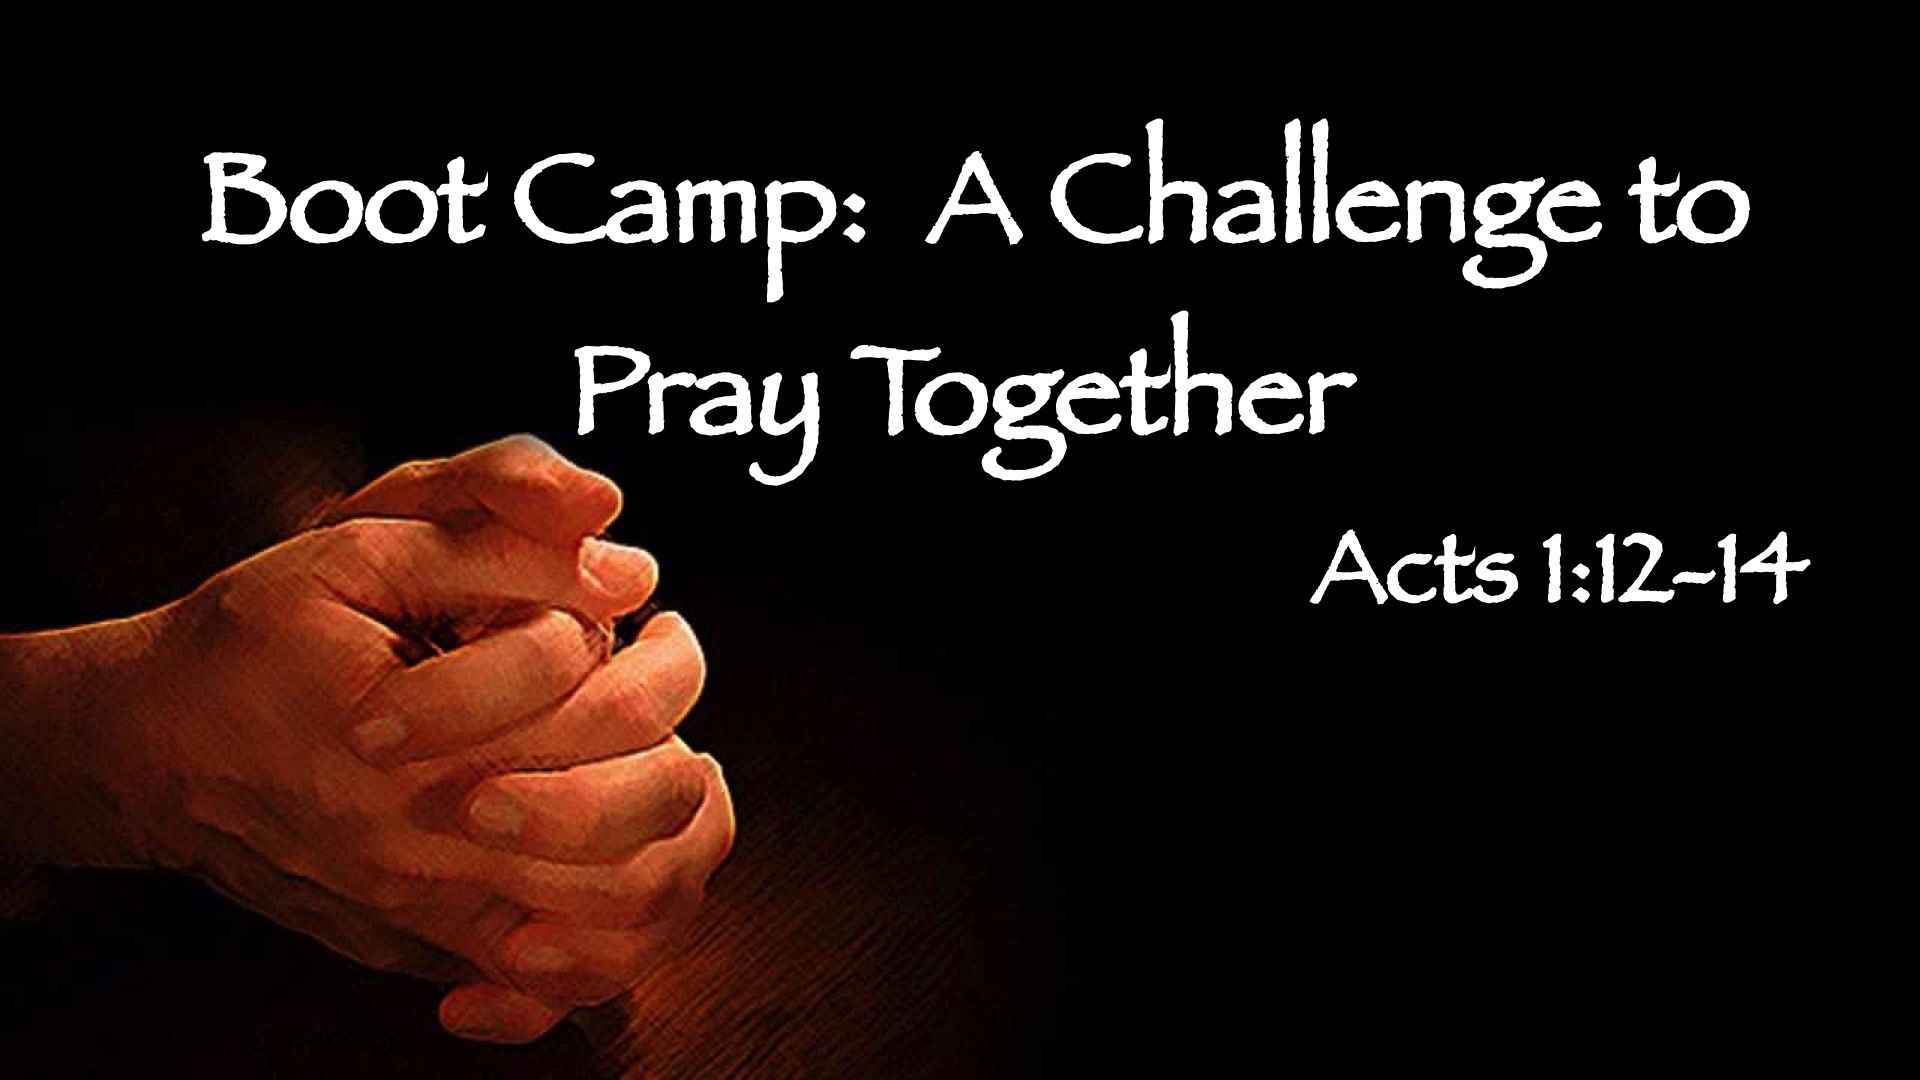 Boot Camp: A Challenge to Pray Together